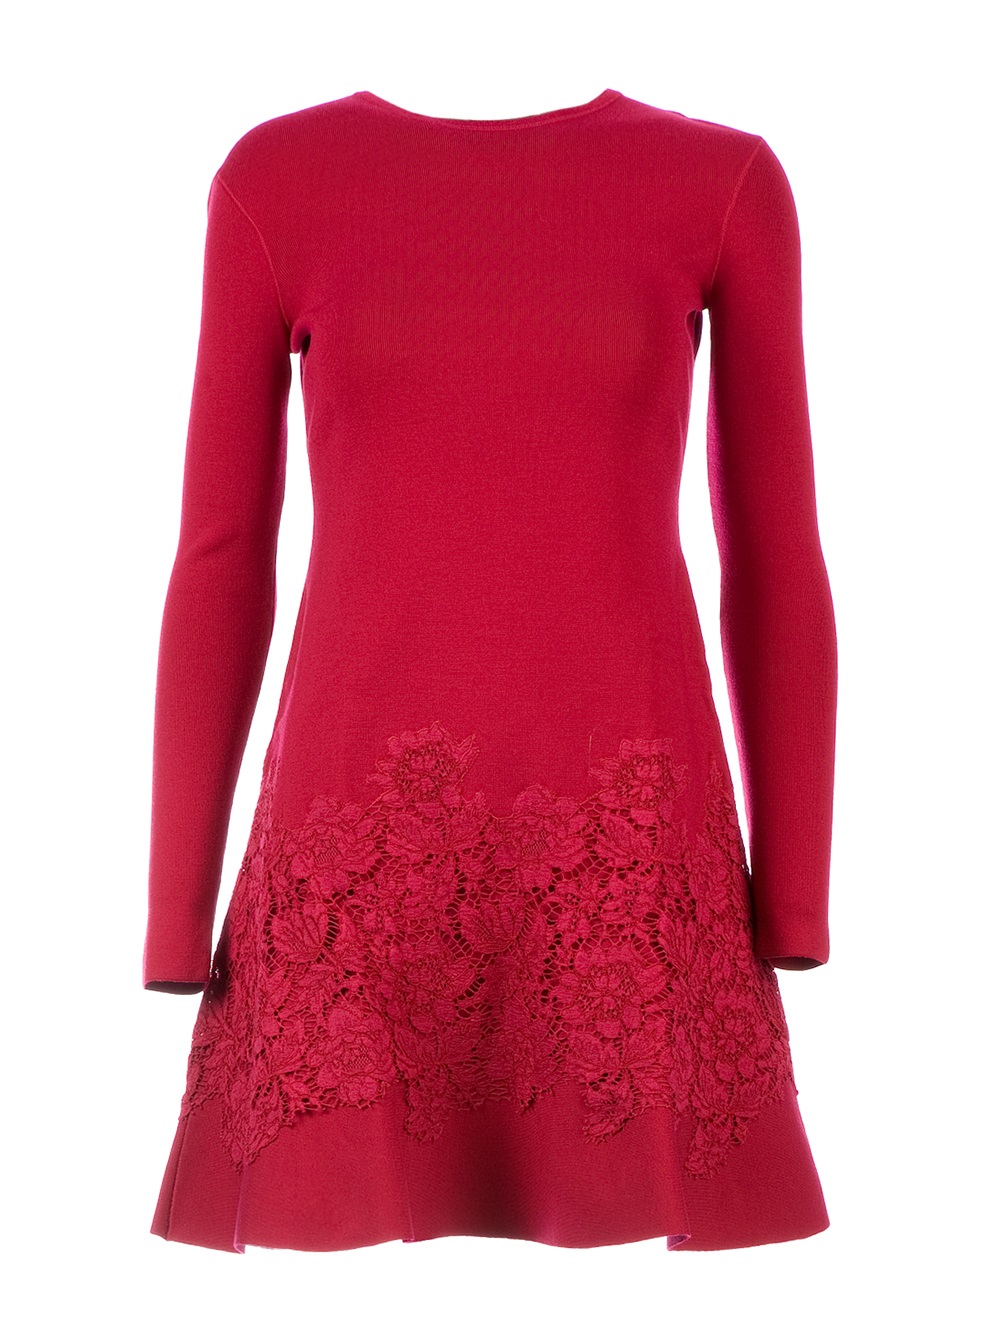 Valentino Lace Detail Sweater Dress in Red | Lyst